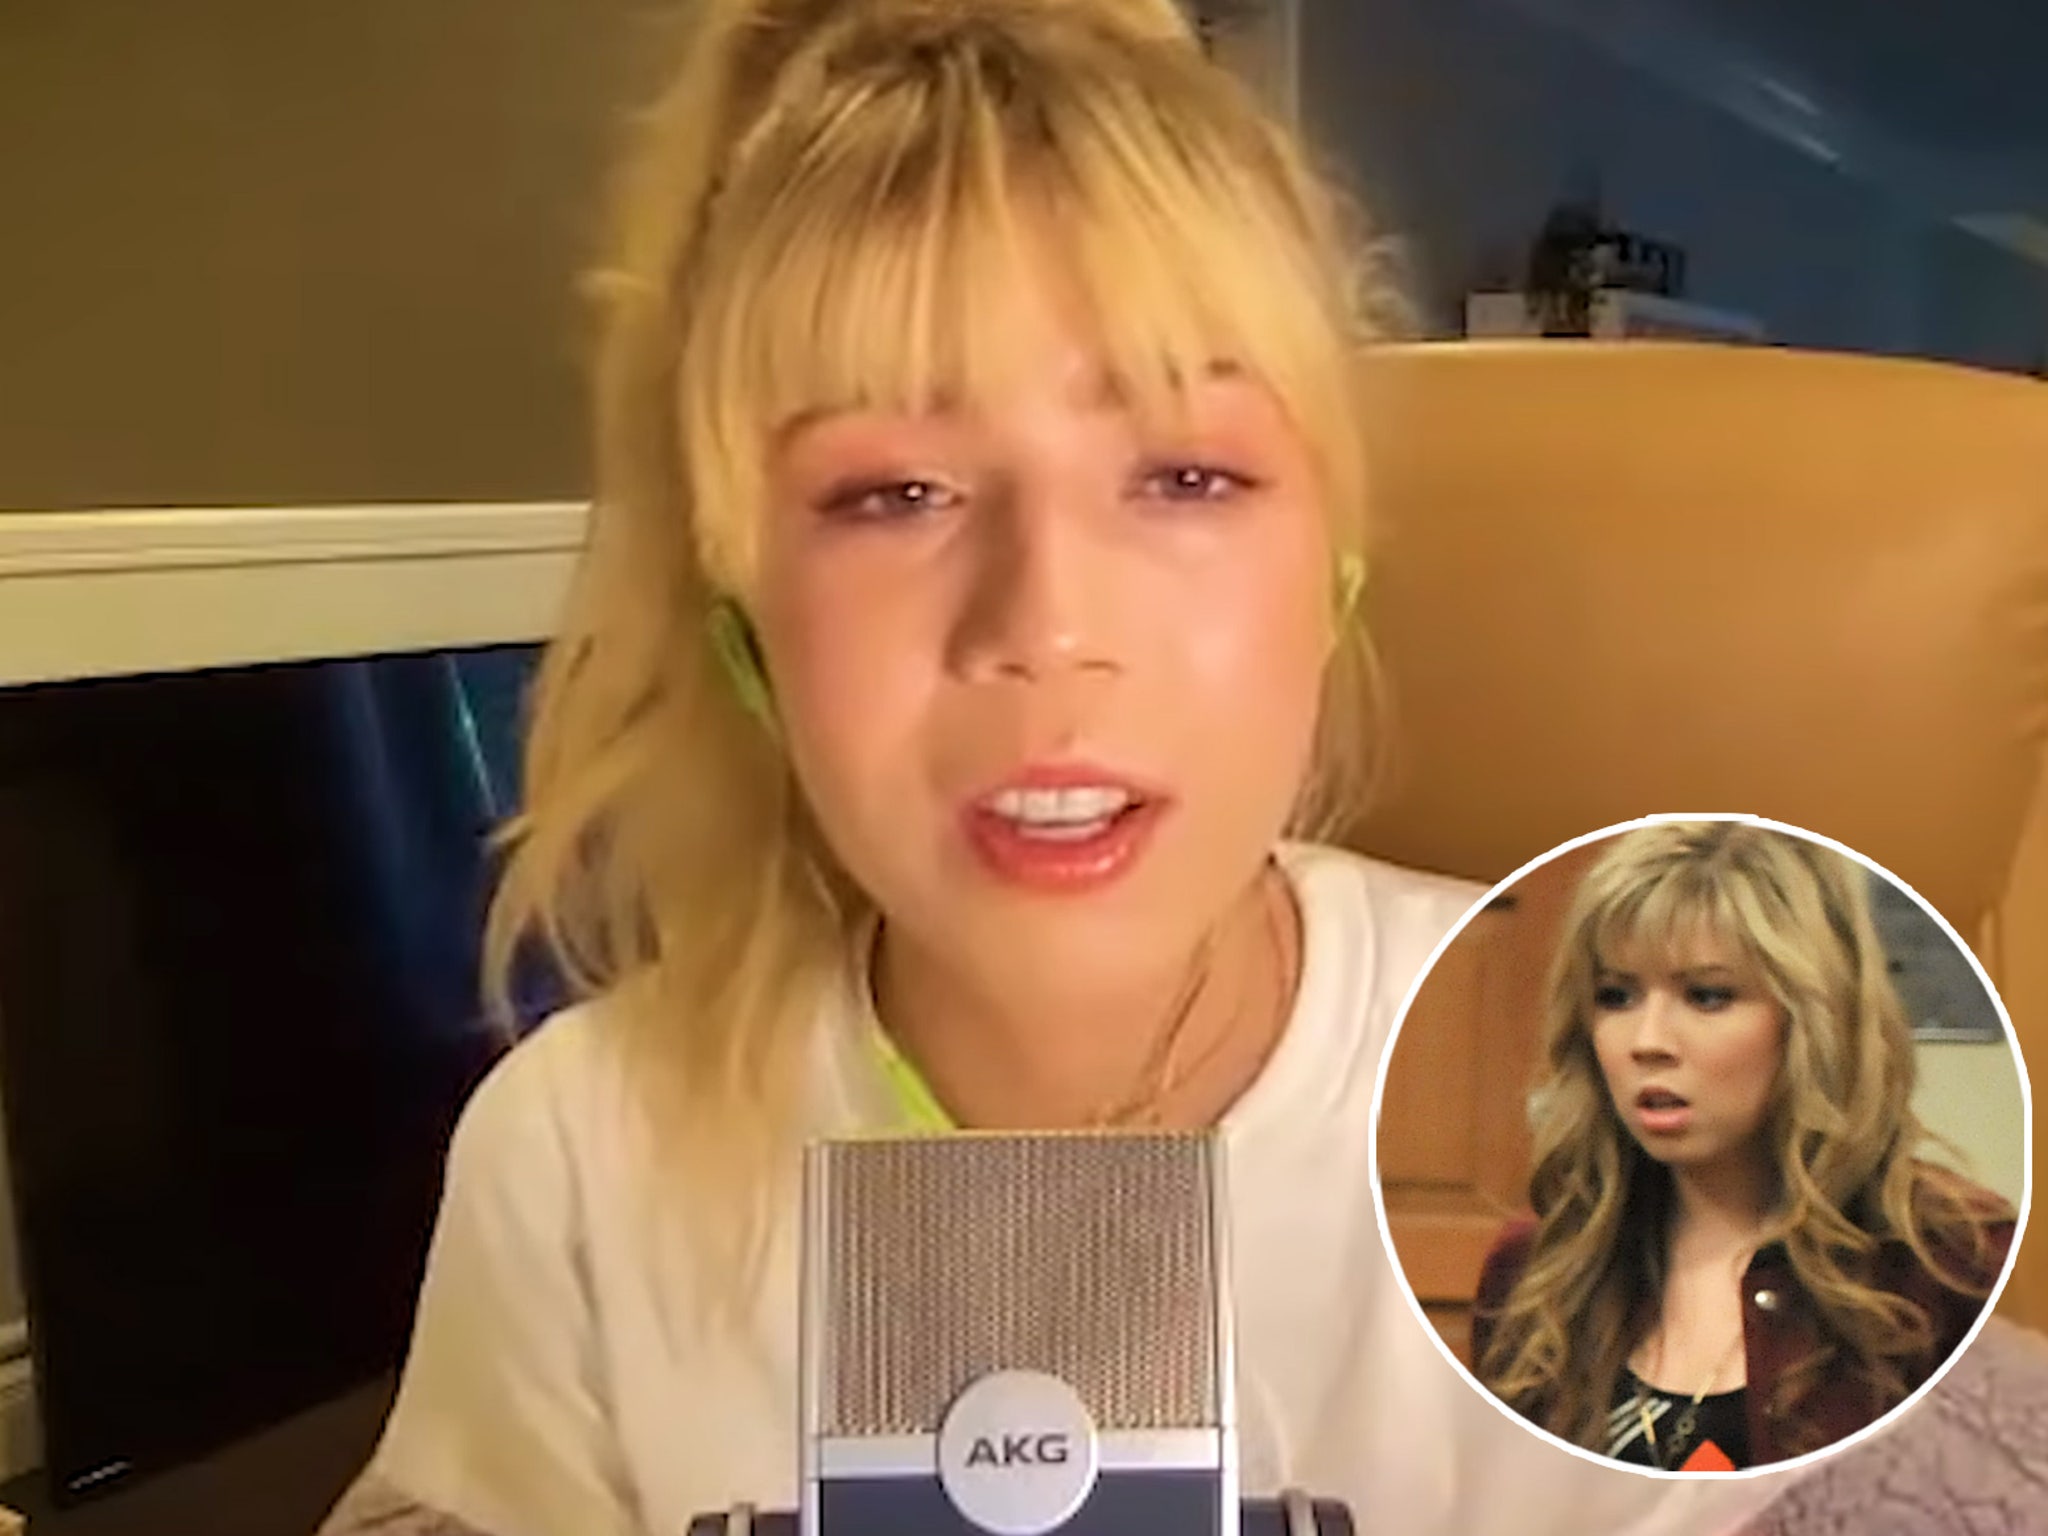 Icarlys jennette mccurdy says moms advice resulted in anorexia